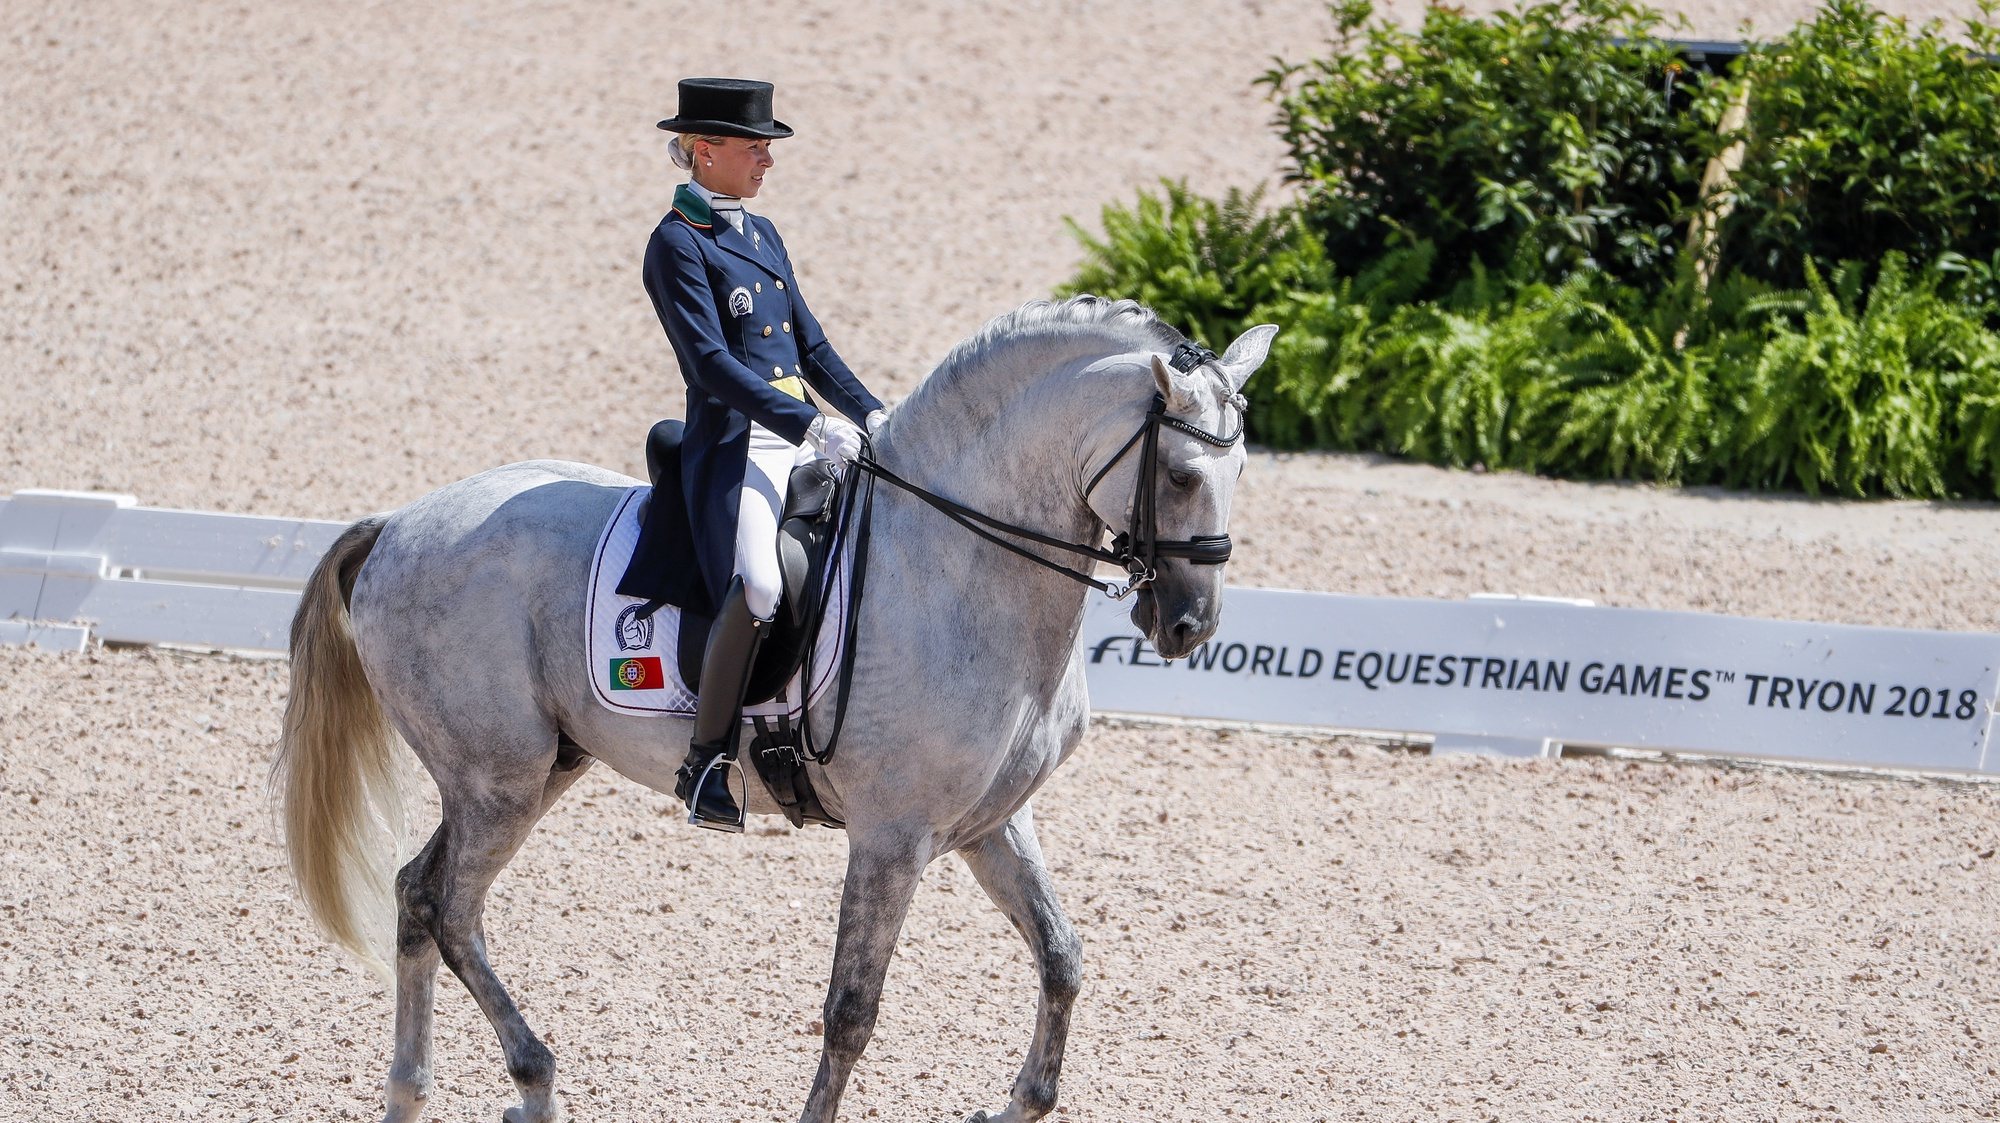 epa07018202 Maria Caetano of Portugal competes aboard Coroado during the team championship Grand Prix de Dressage at the FEI World Equestrian Games 2018 at the Tryon International Equestrian Center in Mill Spring, North Carolina, USA, 13 September 2018. The World Equestrian Games continue through 23 September 2018.  EPA/ERIK S. LESSER